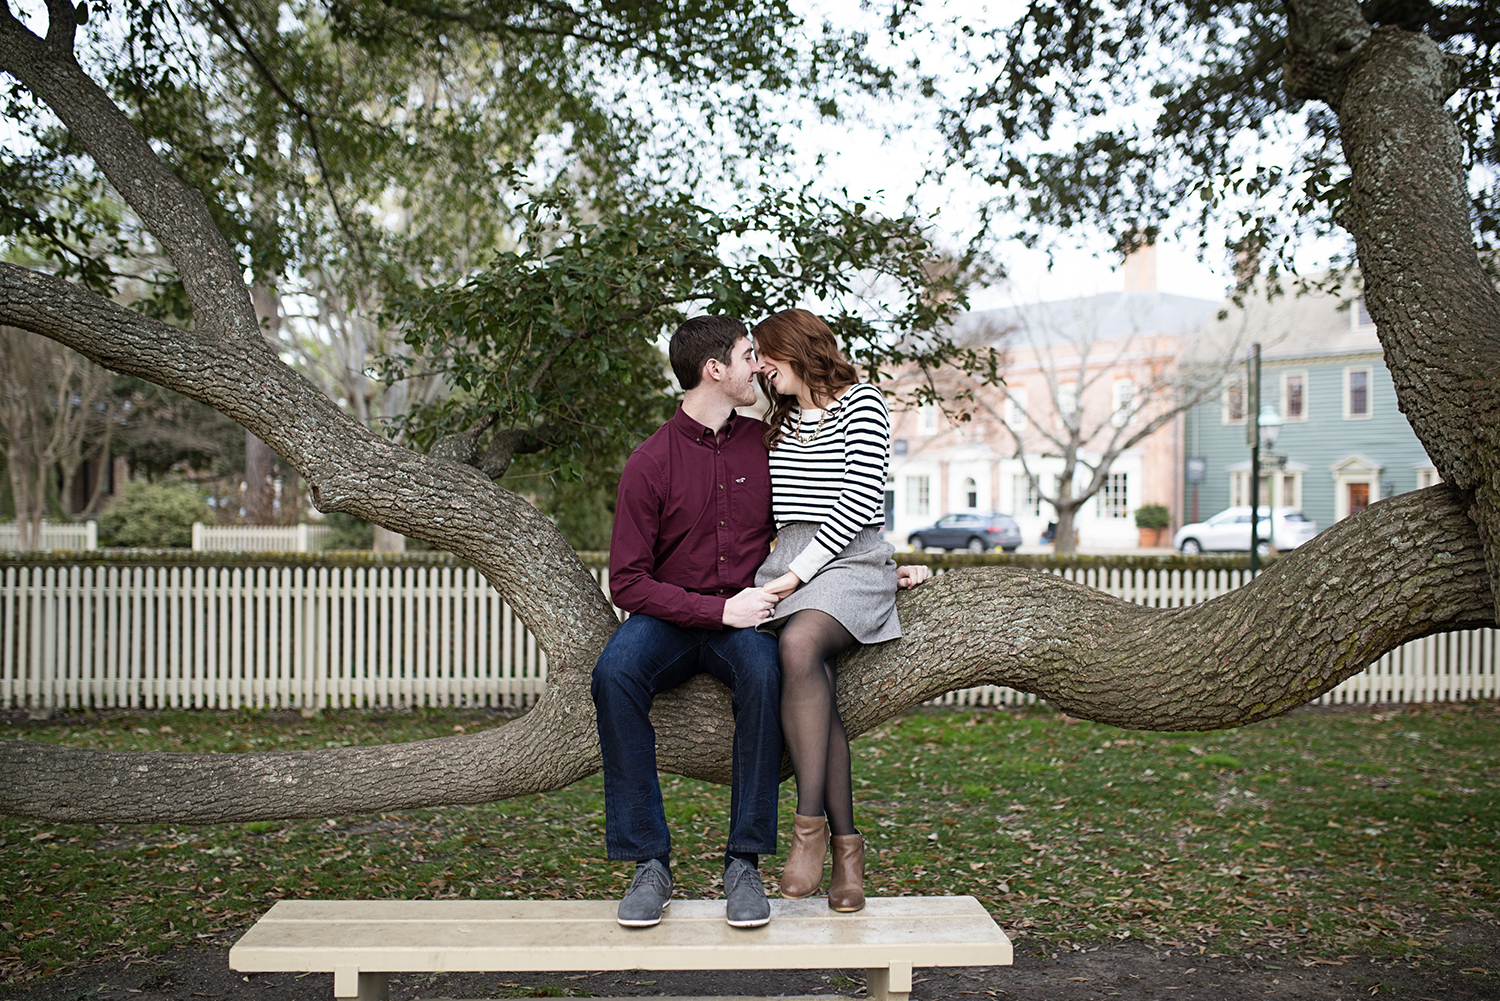 Colonial_Williamsburg_Winter_Engagement_Pictures_05.jpg